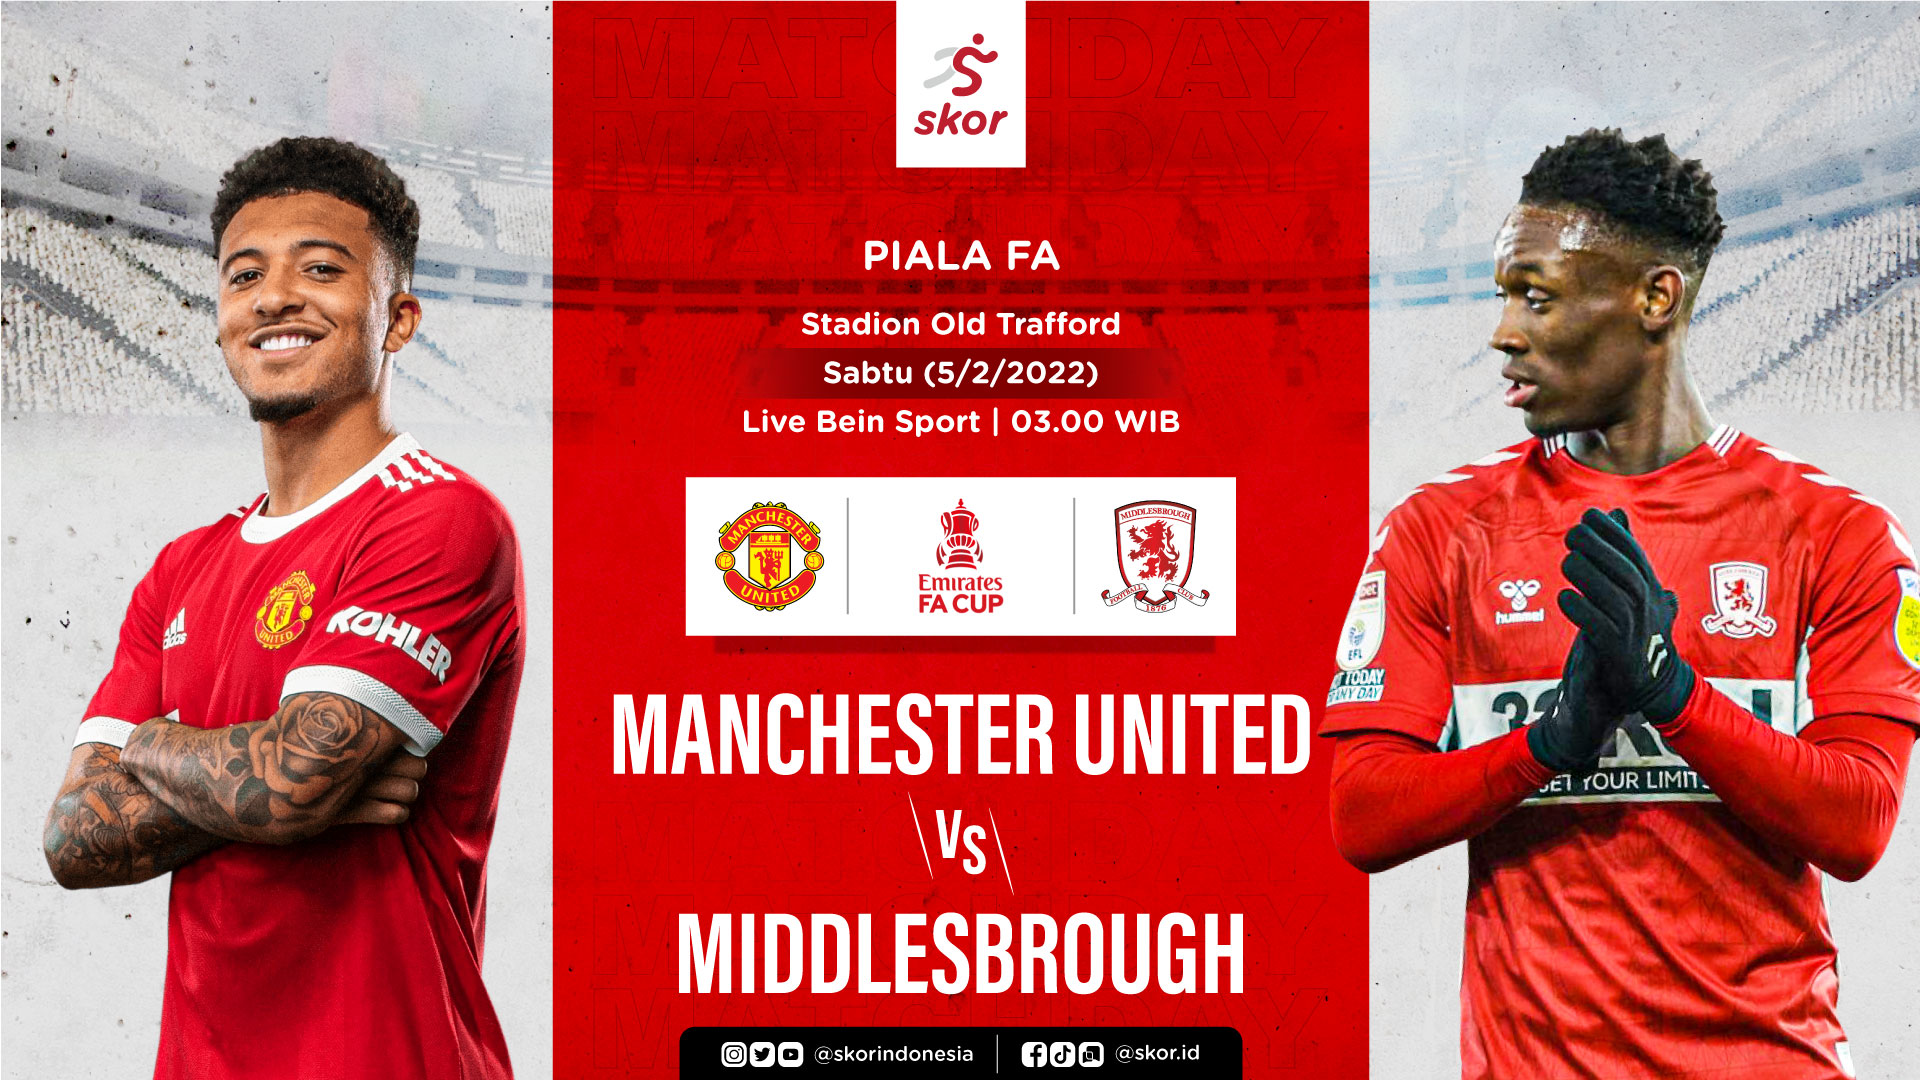 Link Live Streaming Manchester United vs Middlesbrough di Piala FA